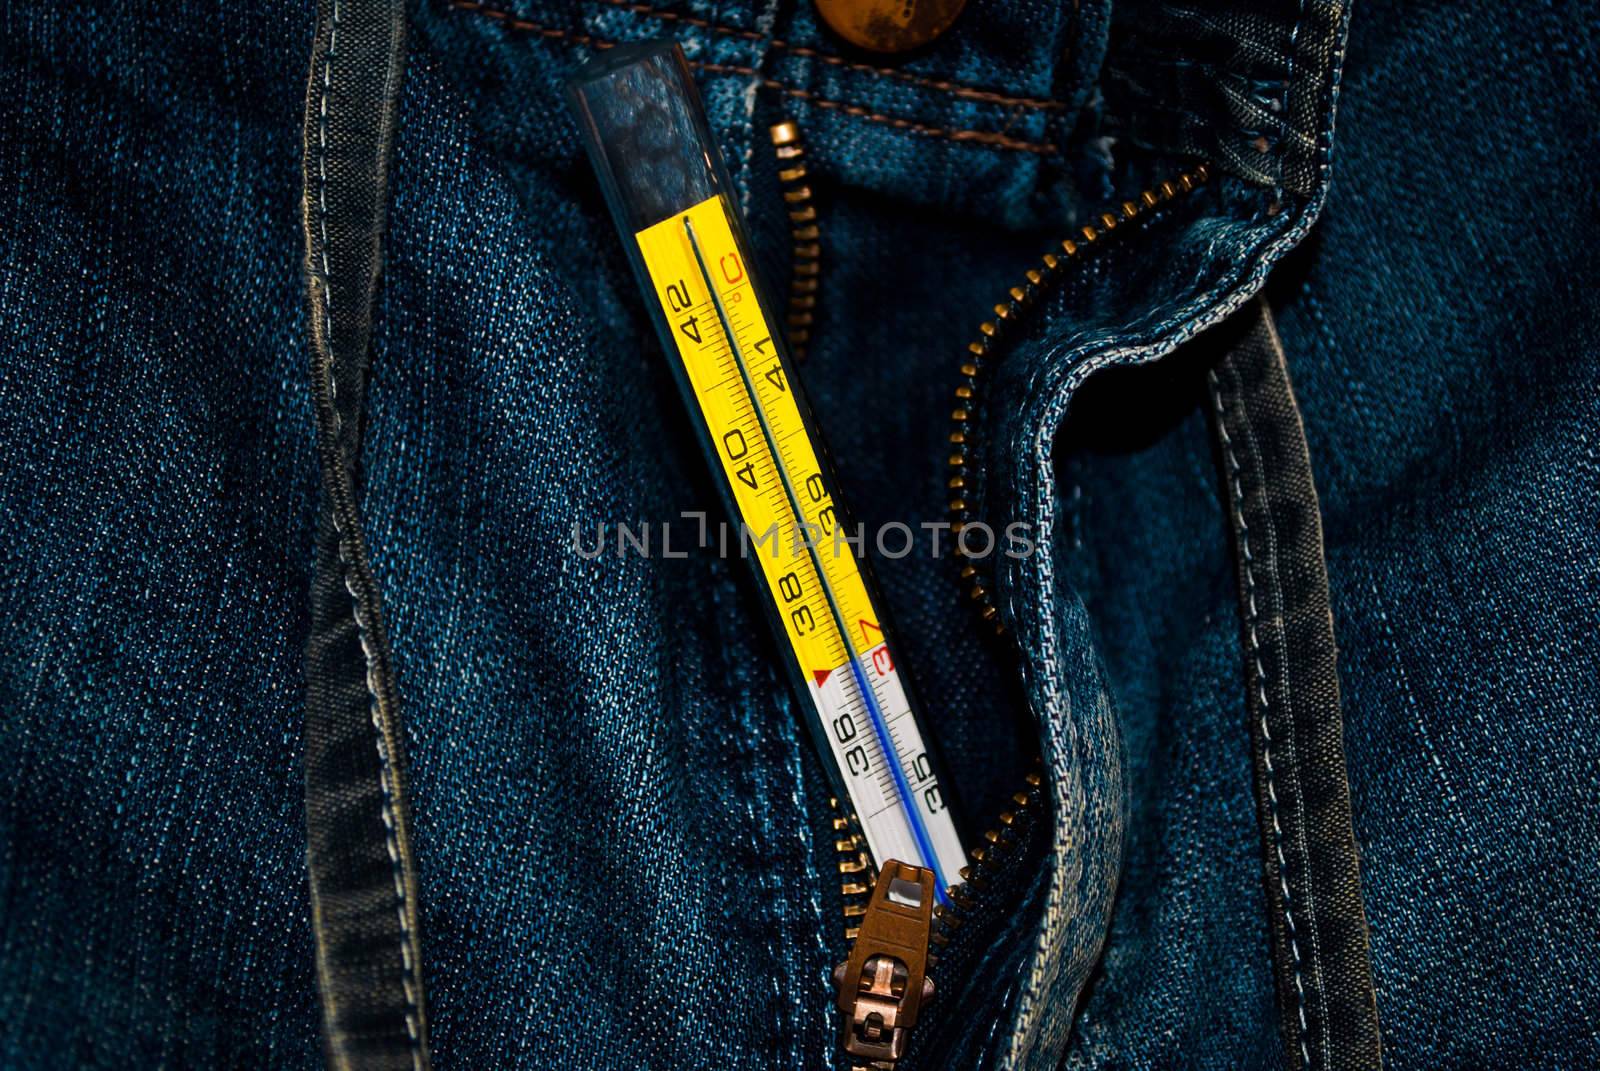 Jeans Crotch measurement with thermometer